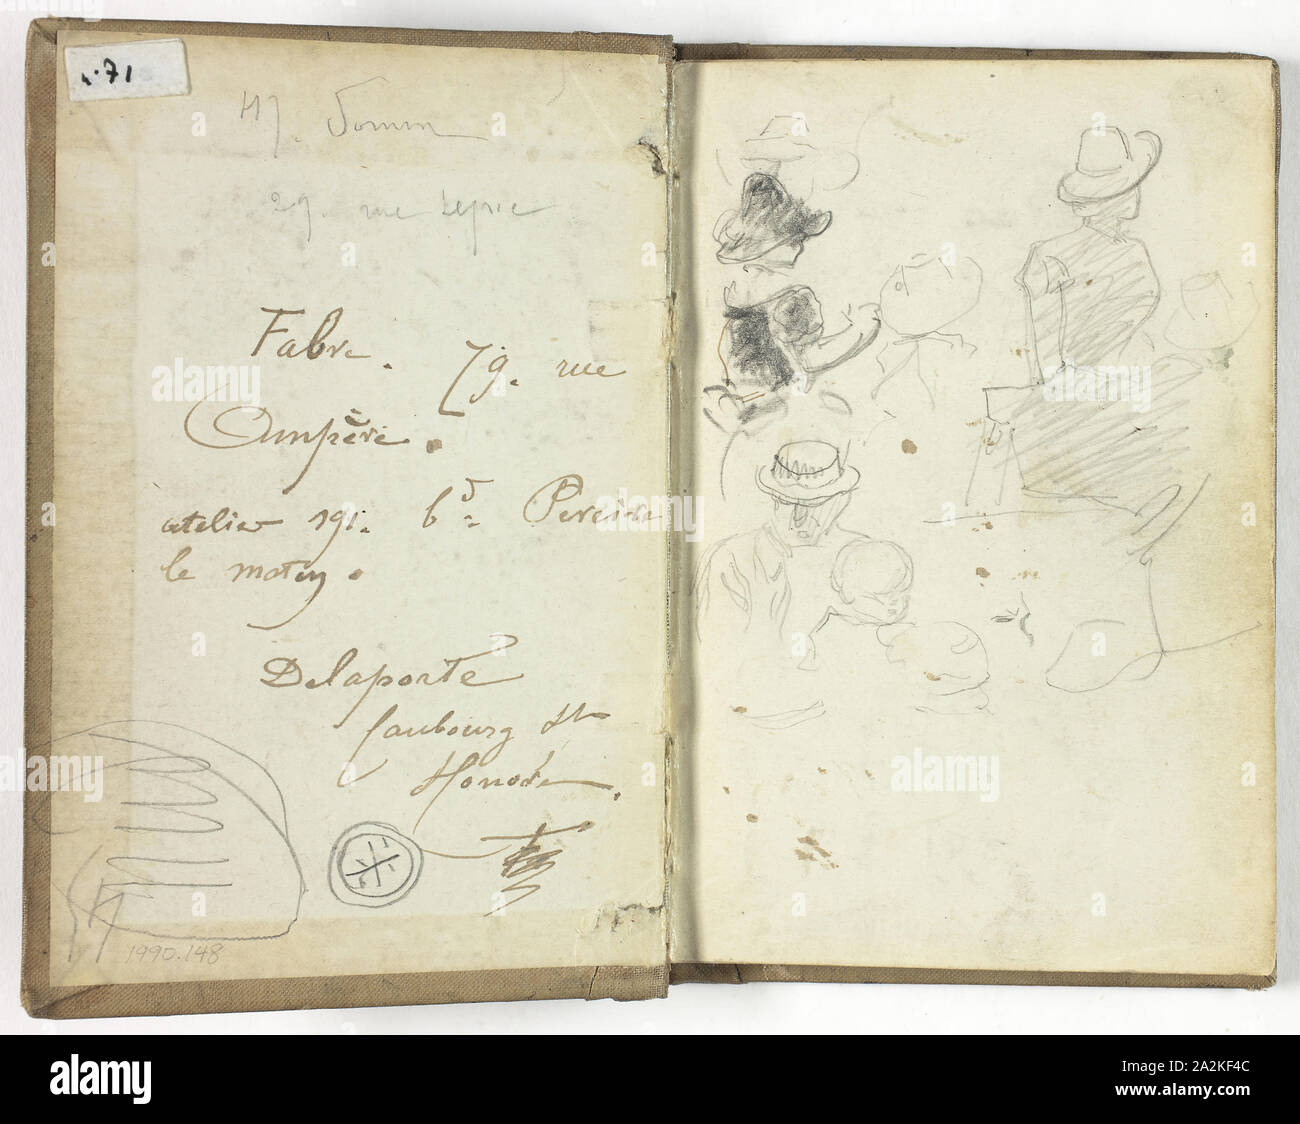 Sketchbook, c. 1885, Henry Somm, French, 1844-1907, France, Pen and black, brown, and blue inks and graphite on ivory wove paper, 140 × 90 mm (page), 149 × 100 mm (binding Stock Photo